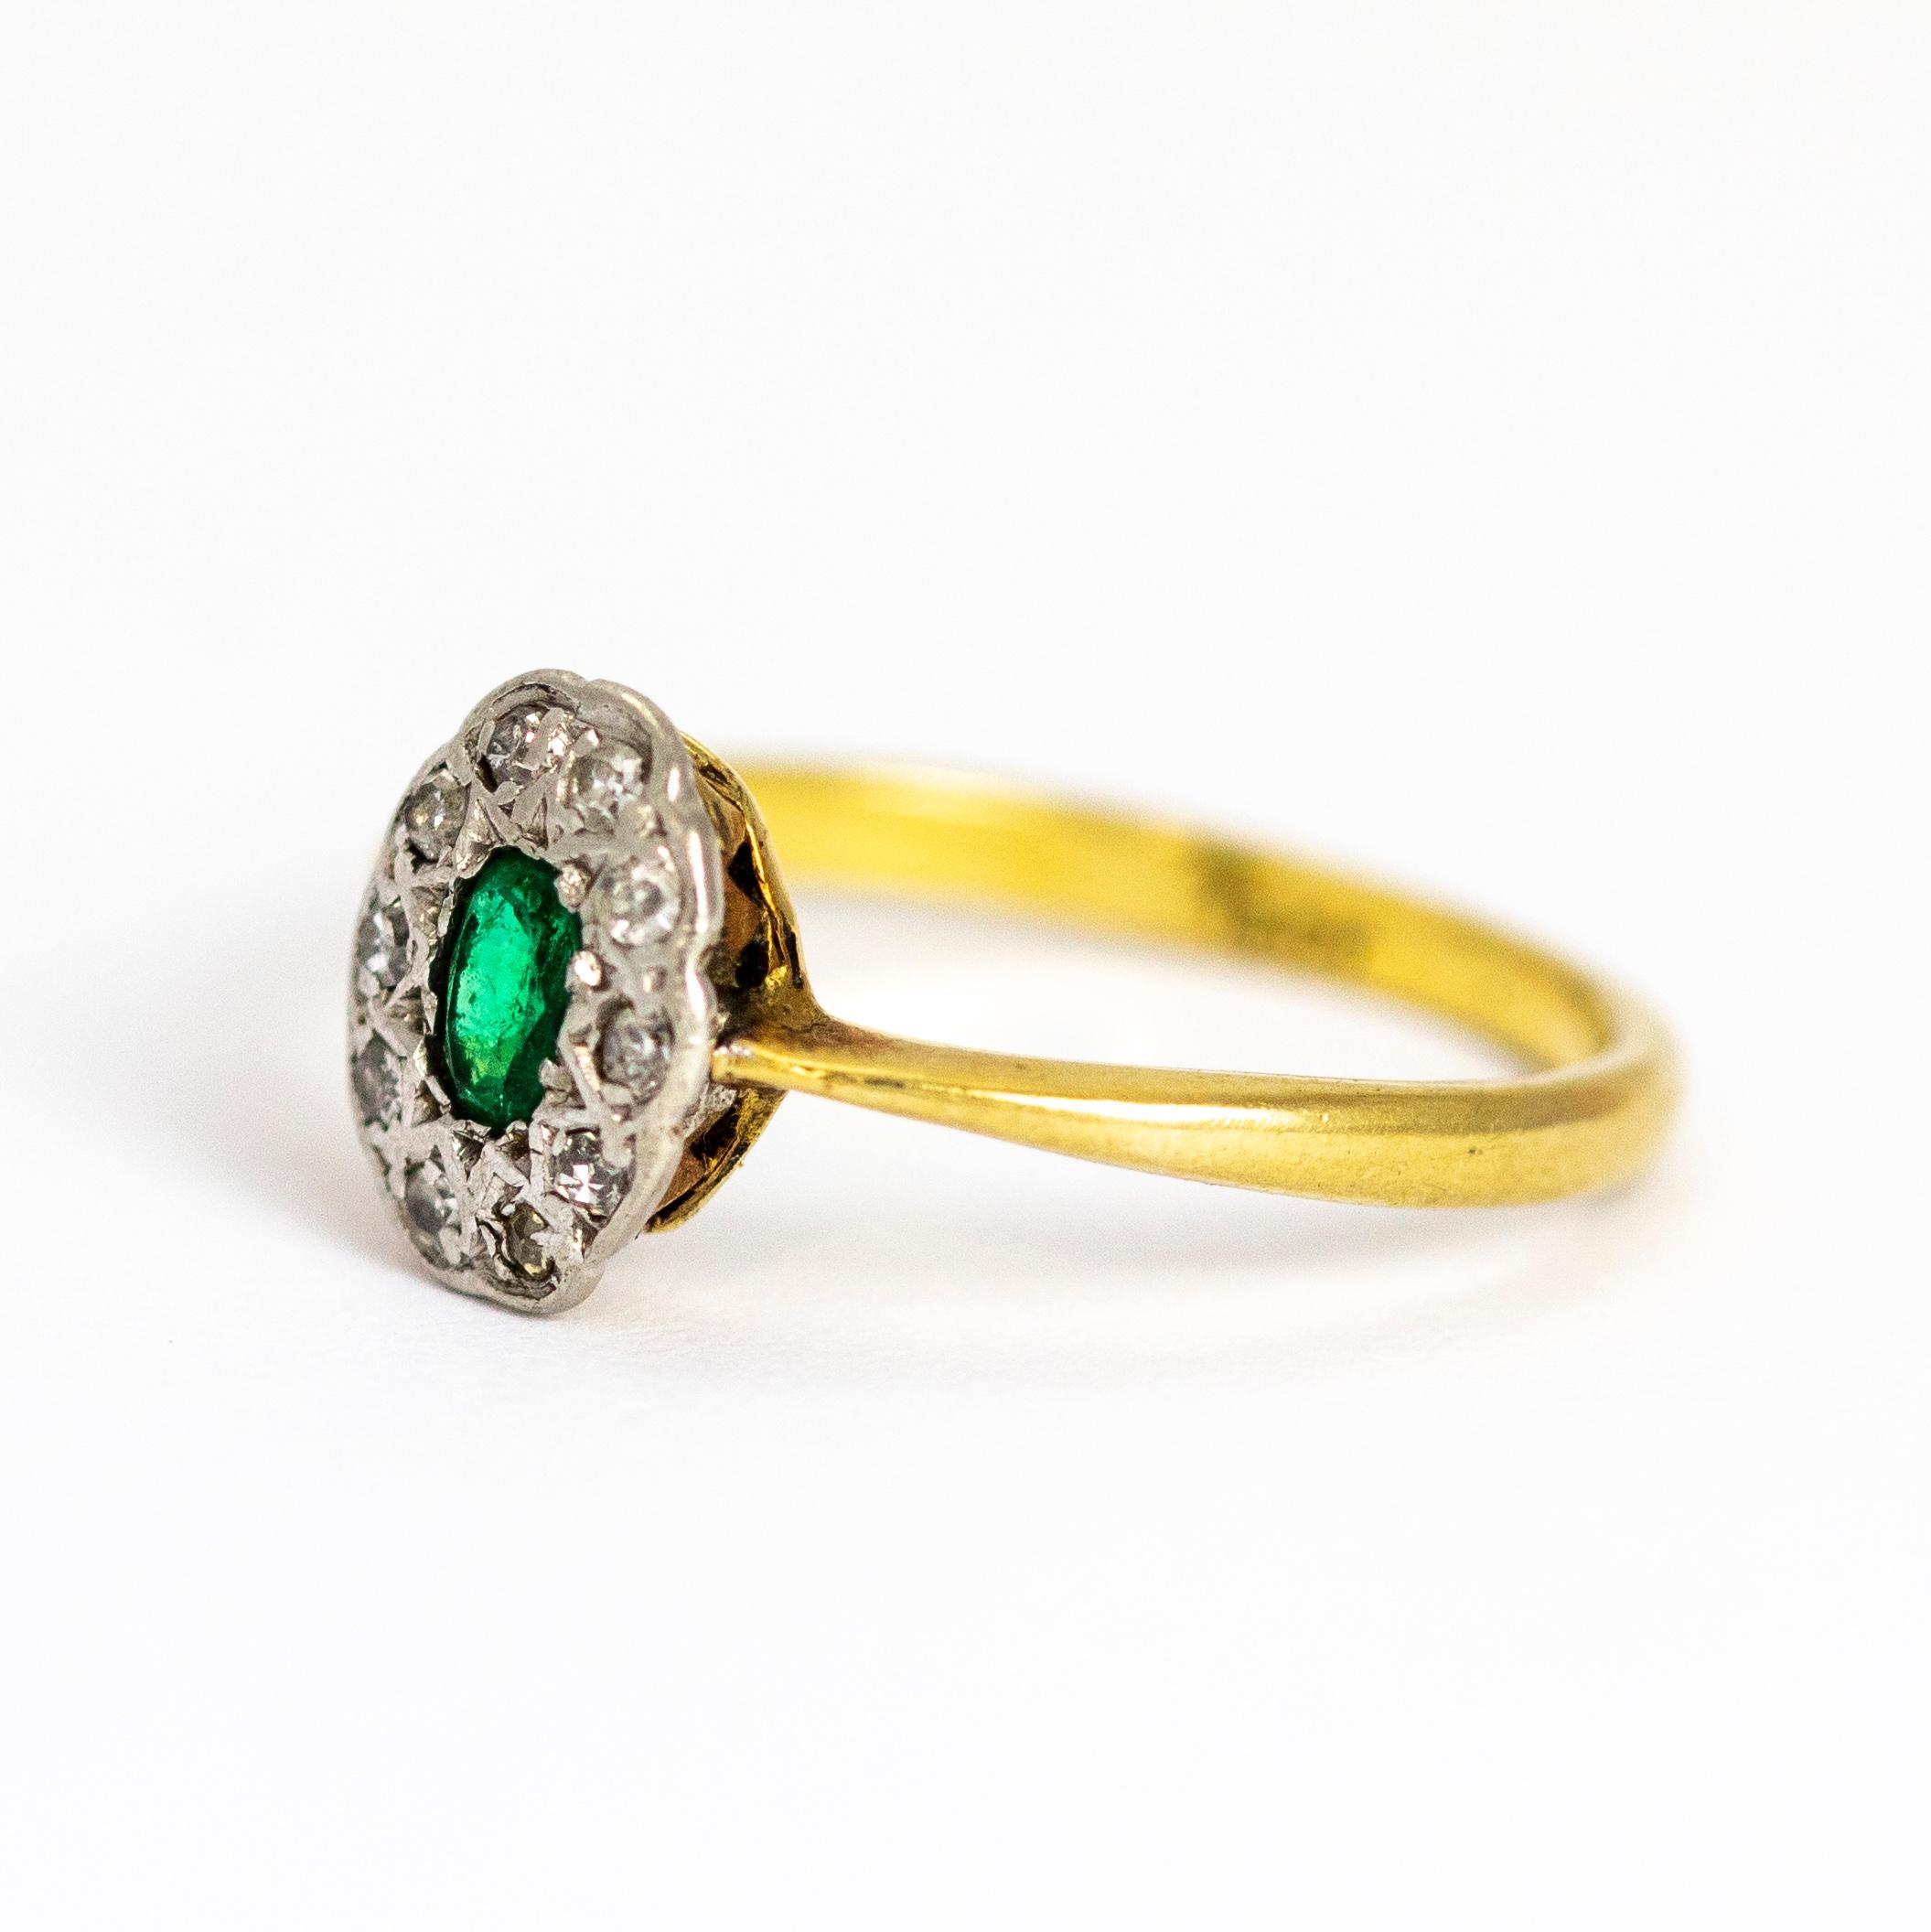 A delightful vintage cluster ring centrally set with a beautiful oval-cut green emerald, surrounded by a halo of ten round diamonds. The stones are set in white gold to complement their colour, band modelled in 18 karat yellow gold.

Ring Size: UK